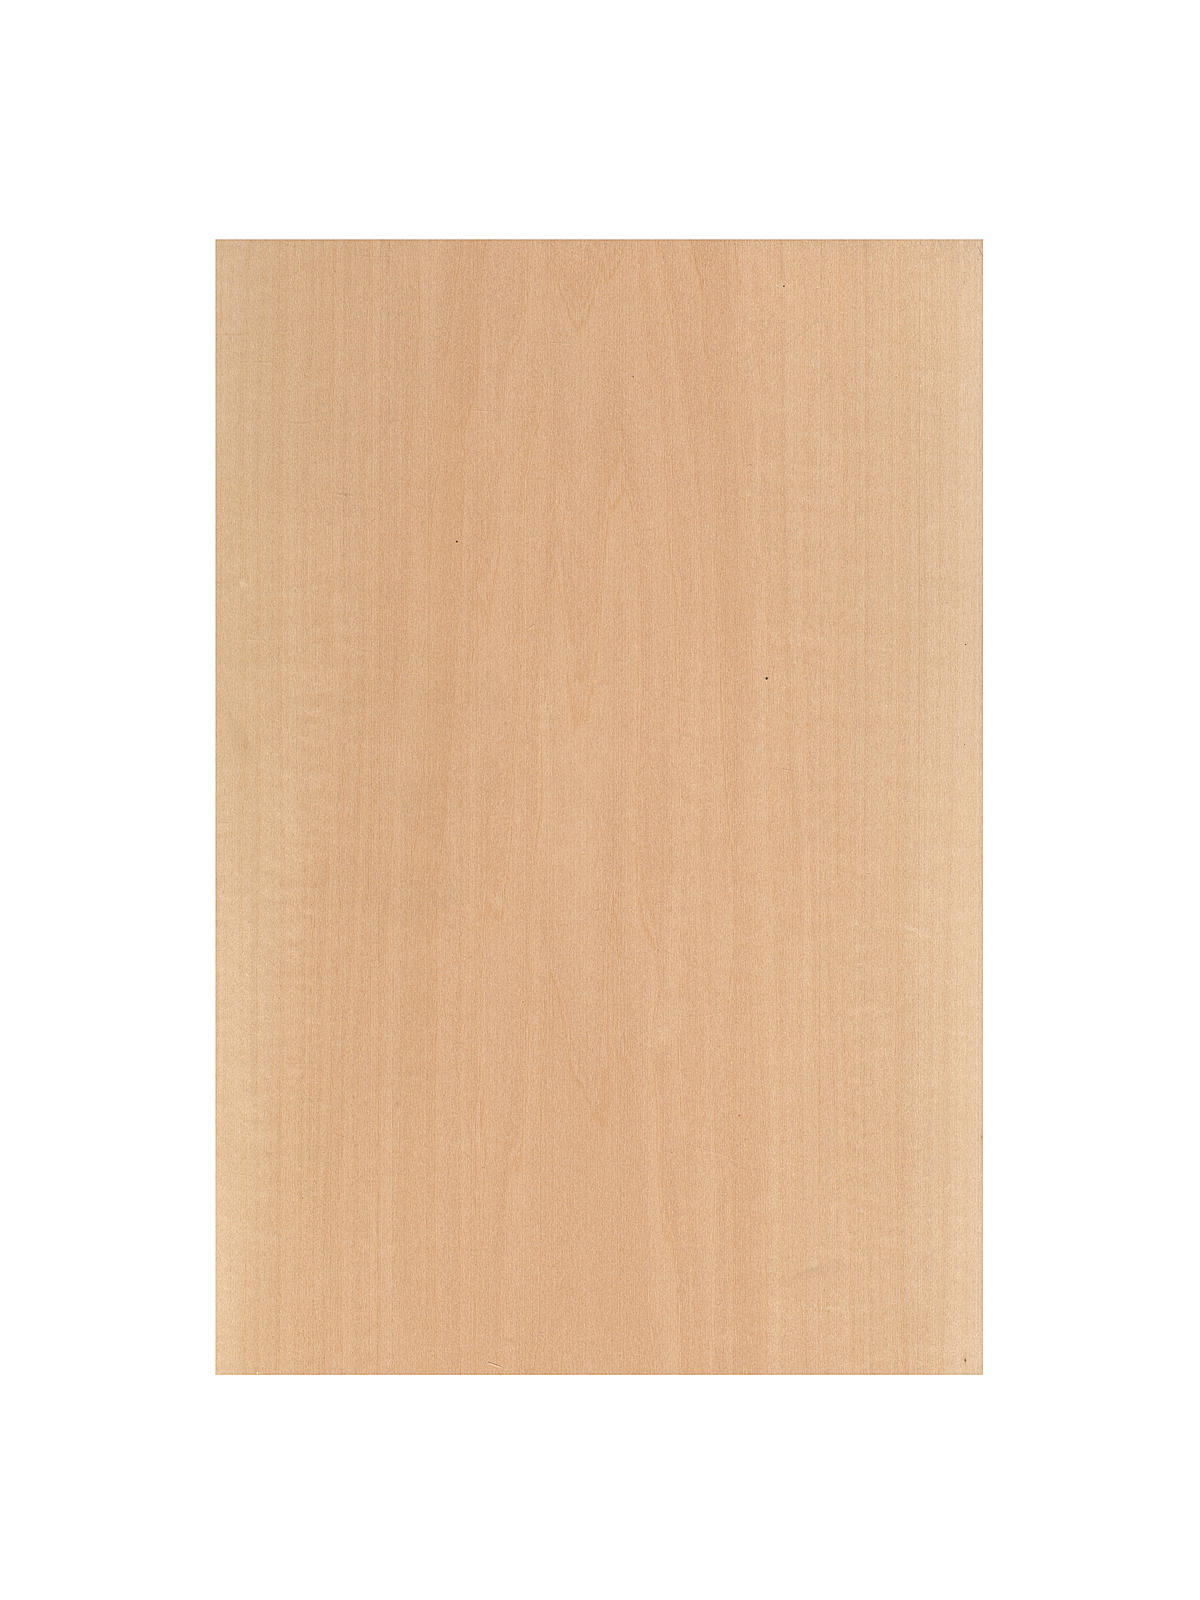 Basswood Sheets 1 8 In. 8 In. X 24 In.